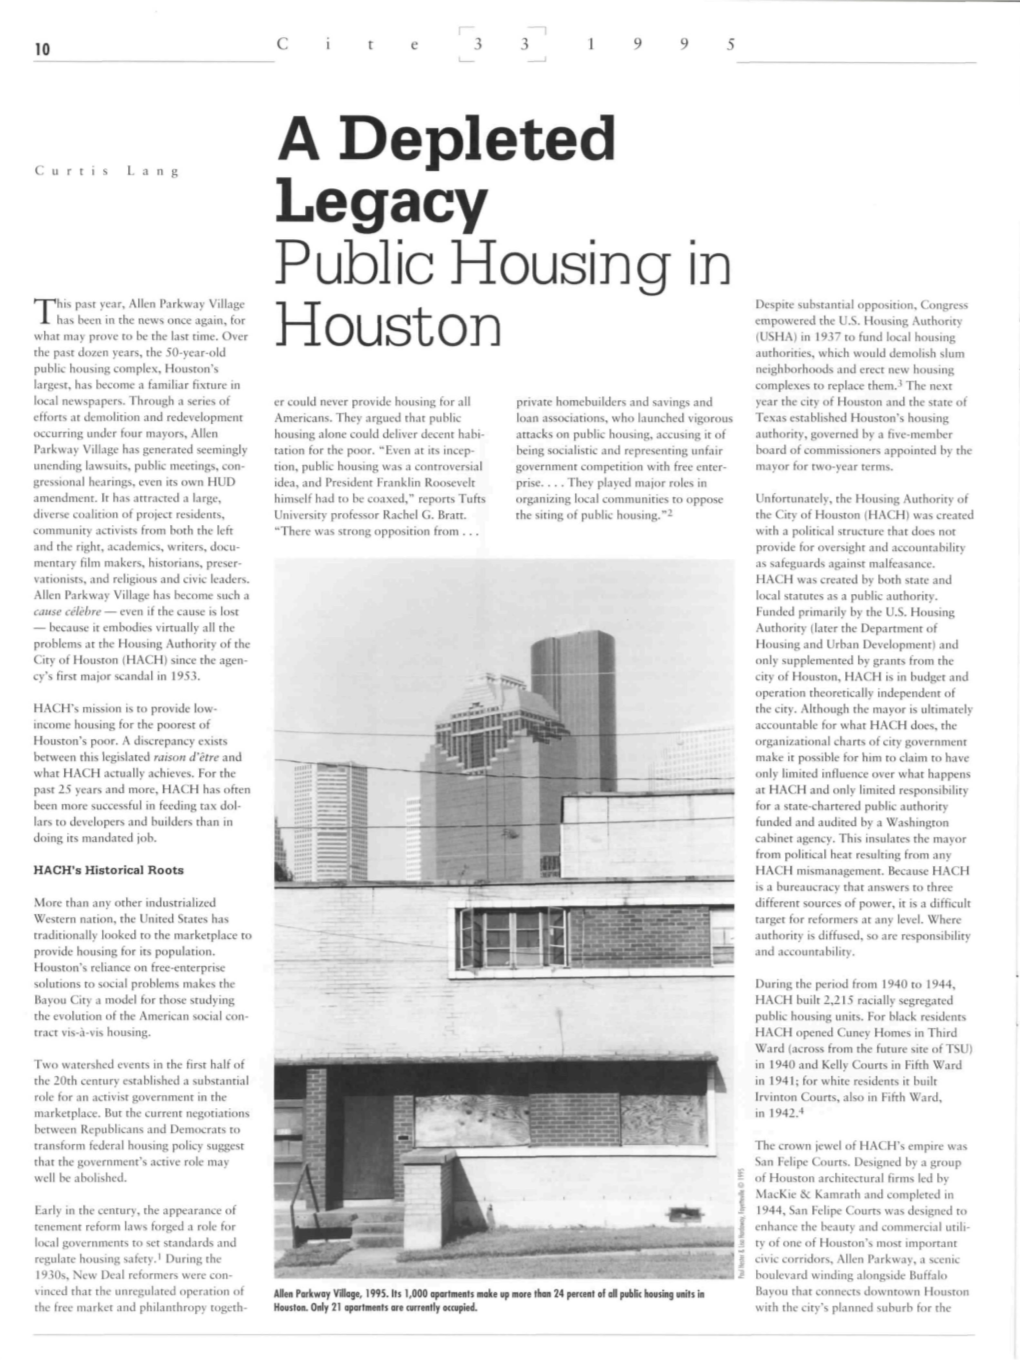 A Depleted Legacy: Public Housing in Houston